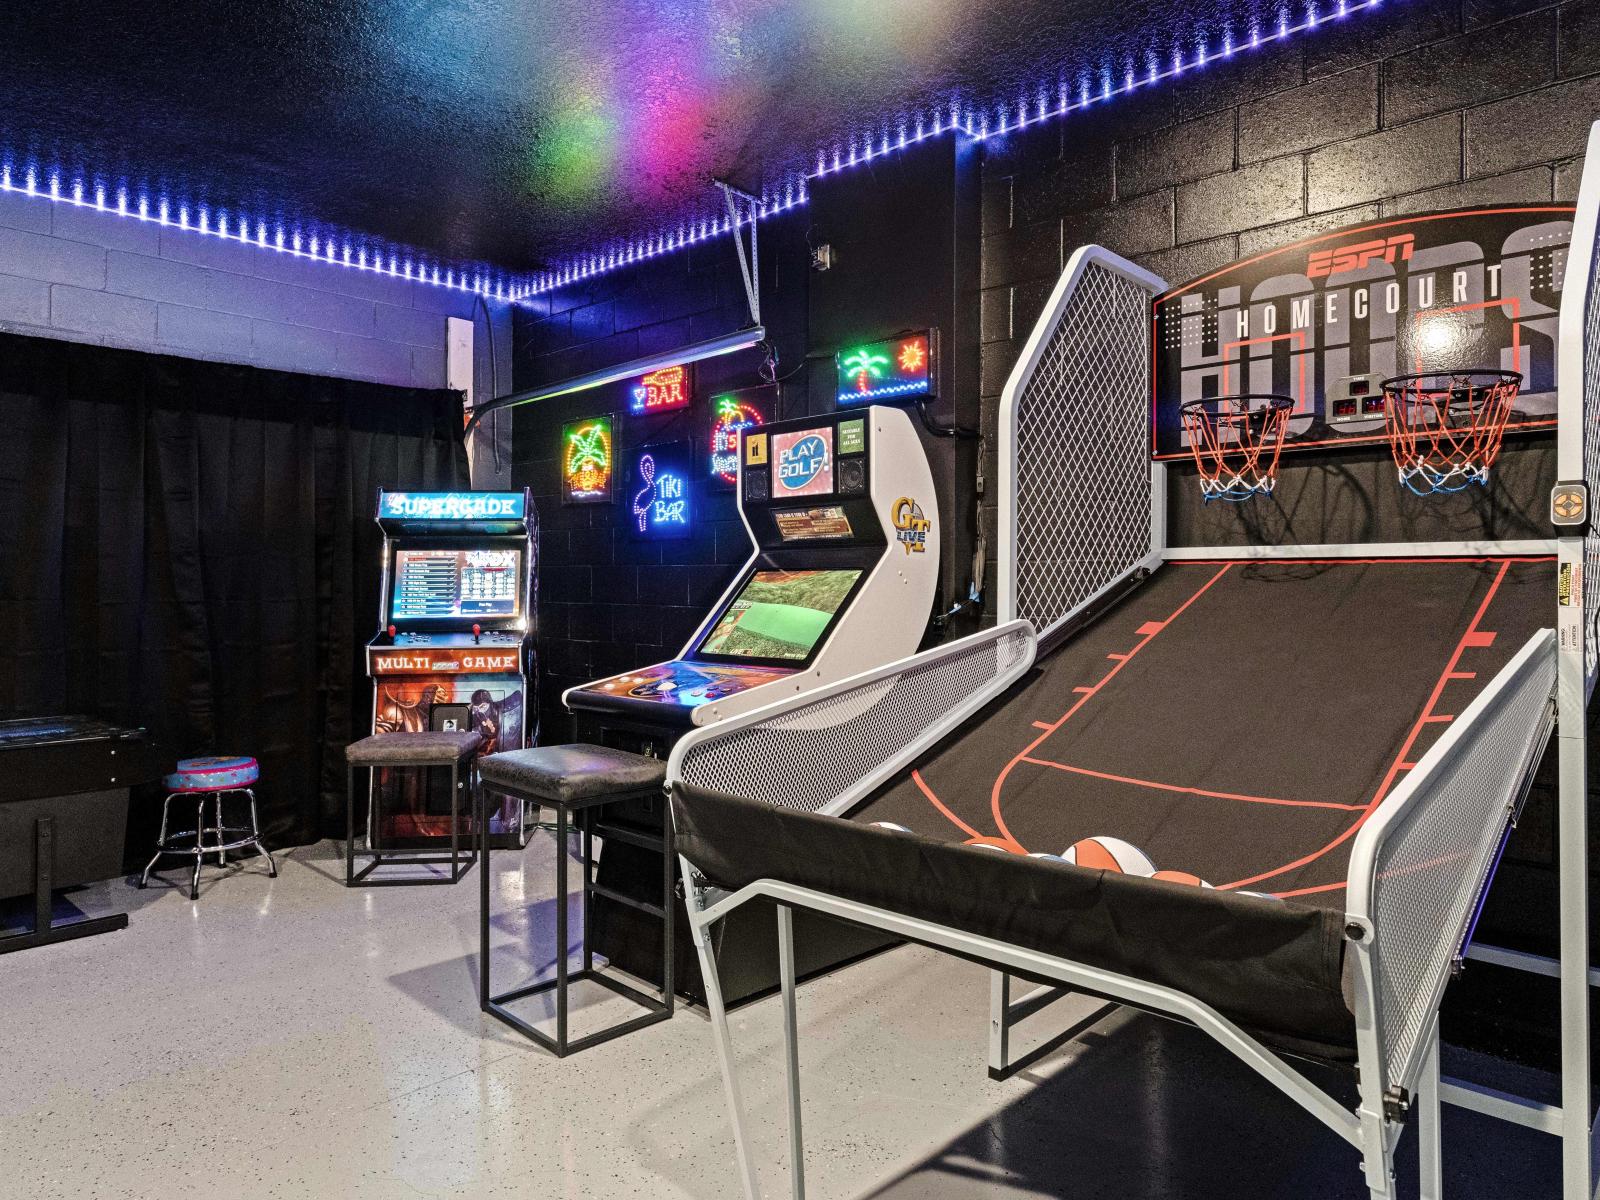 Game room with arcade games